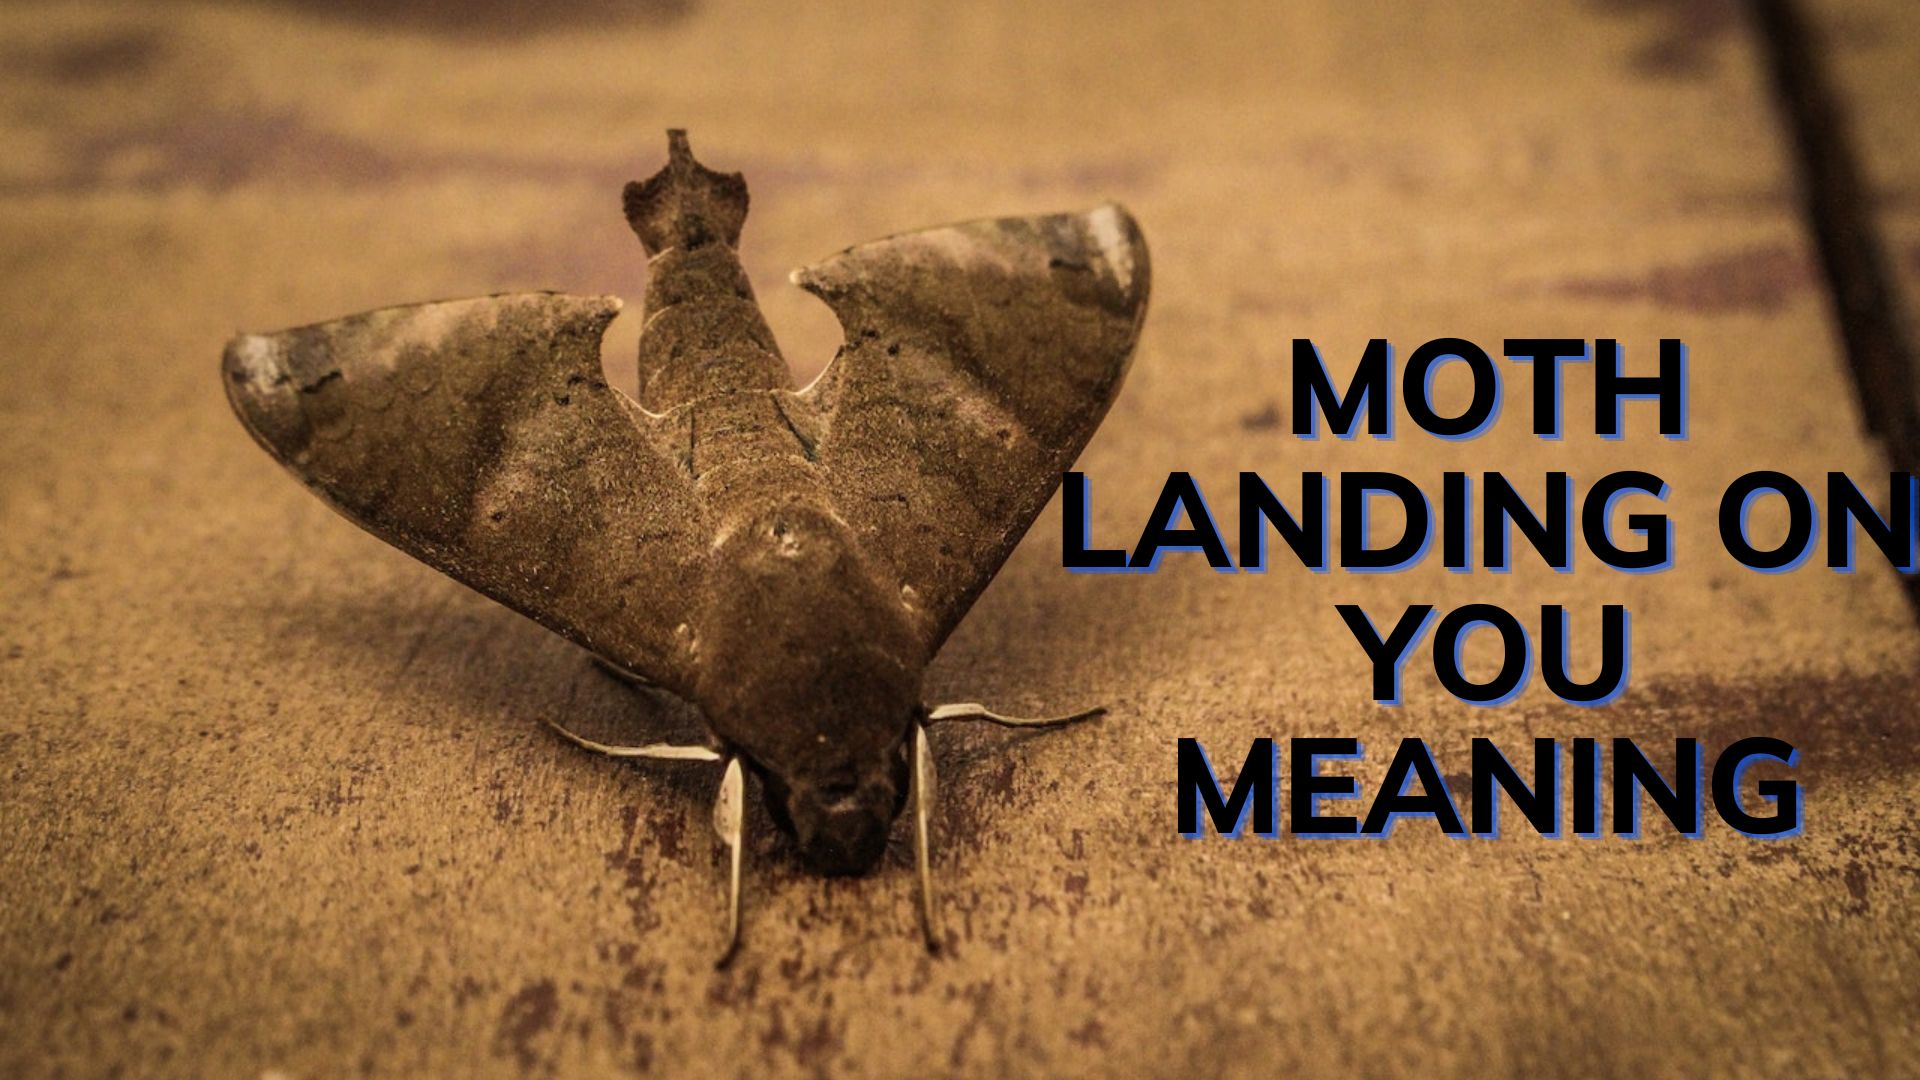 Moth Landing On You Meaning - A Mysterious Spirit Messenger